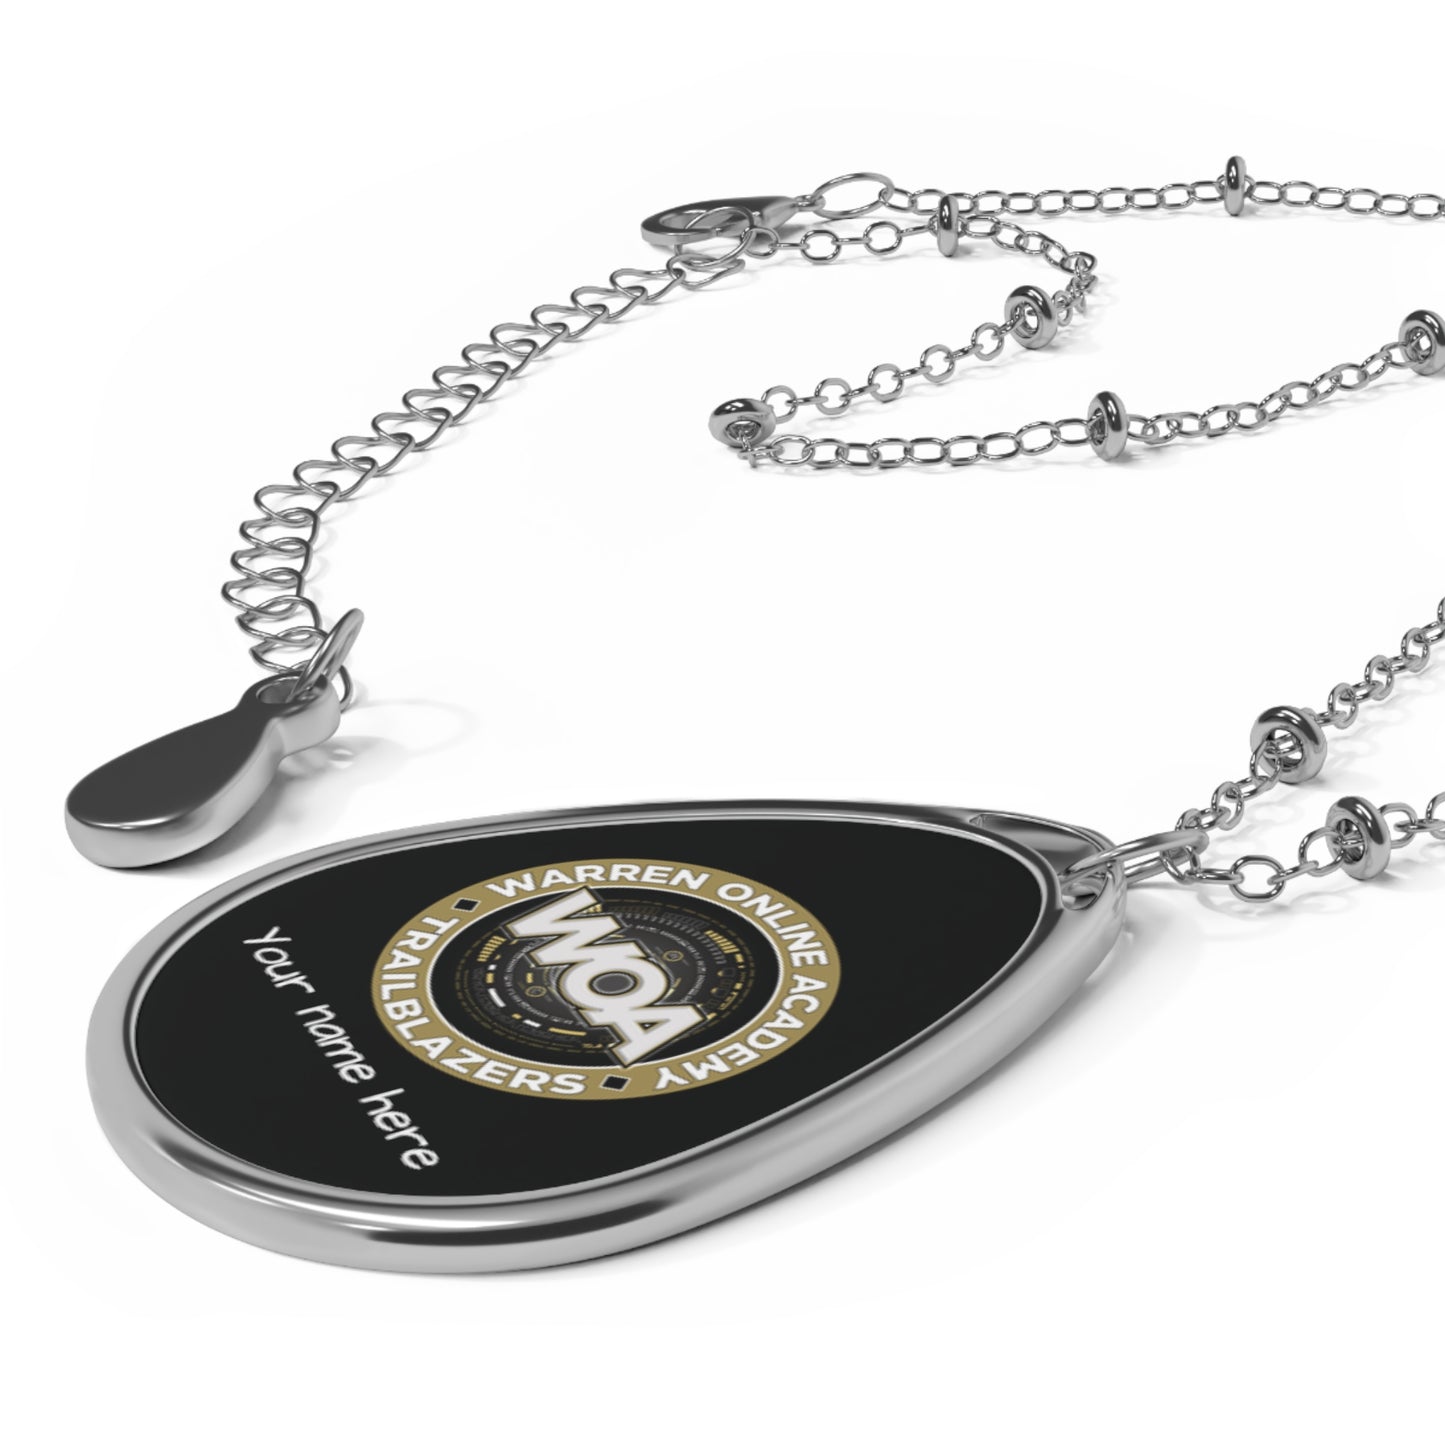 WOA Personalized Oval Necklace | FREE SHIPPING!